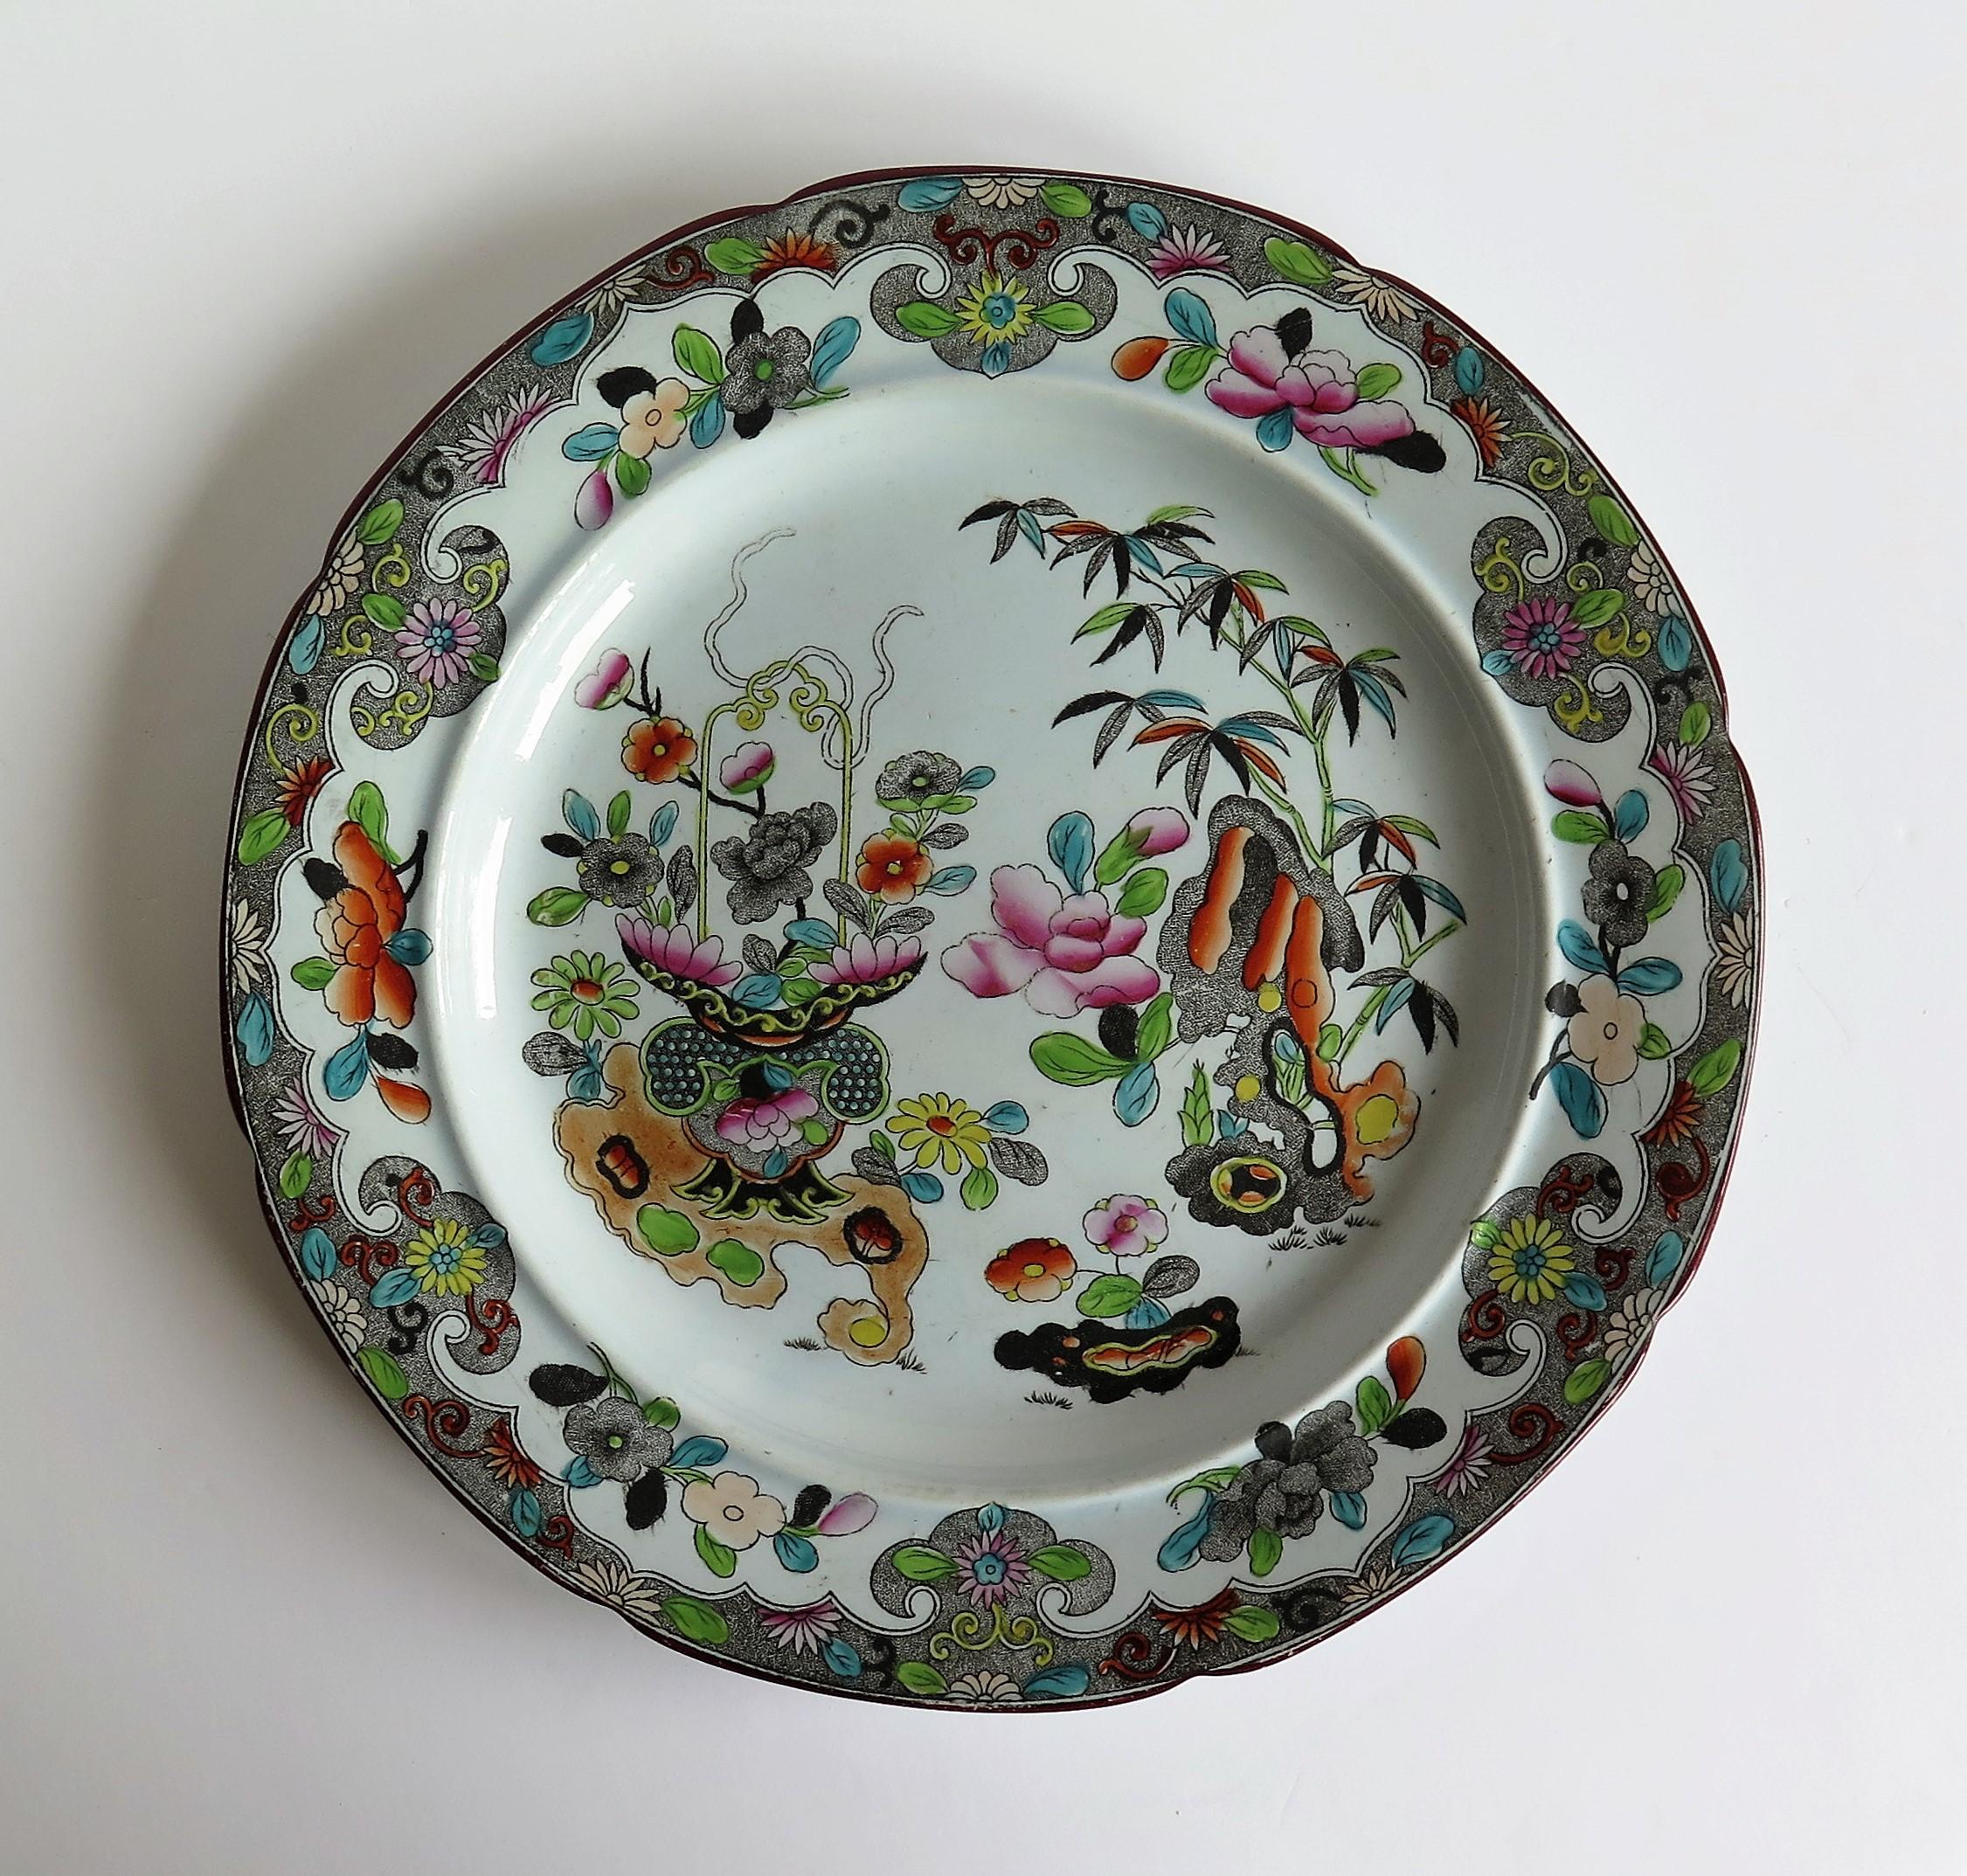 English Stephen Folch Dinner Plate in Bamboo and Basket Pattern Hand Painted, circa 1825